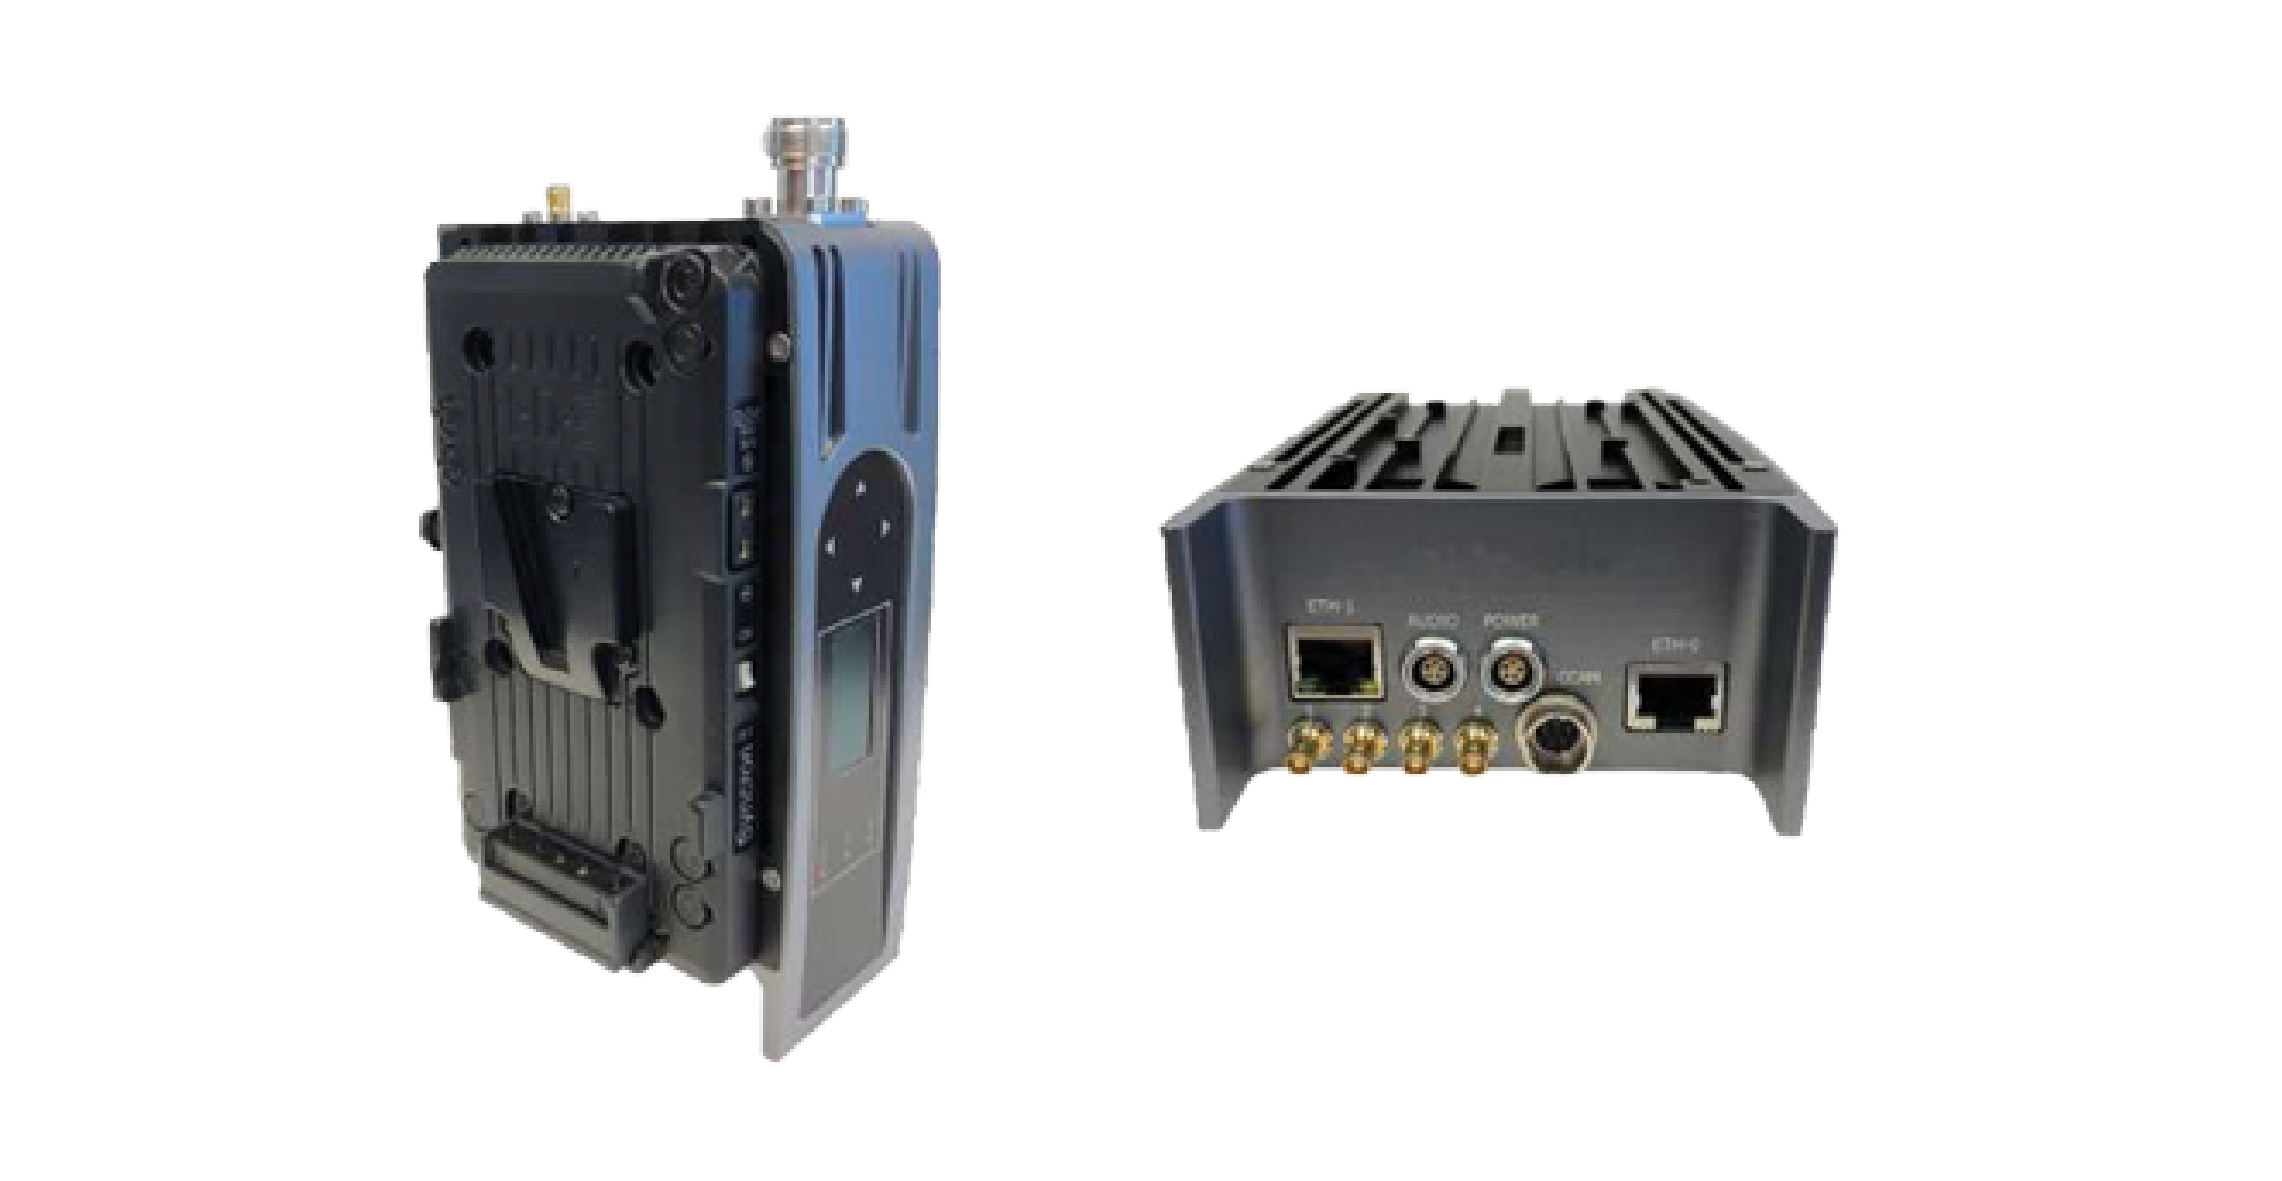 AEON-CC HEVC Transmitter with integrated camera control